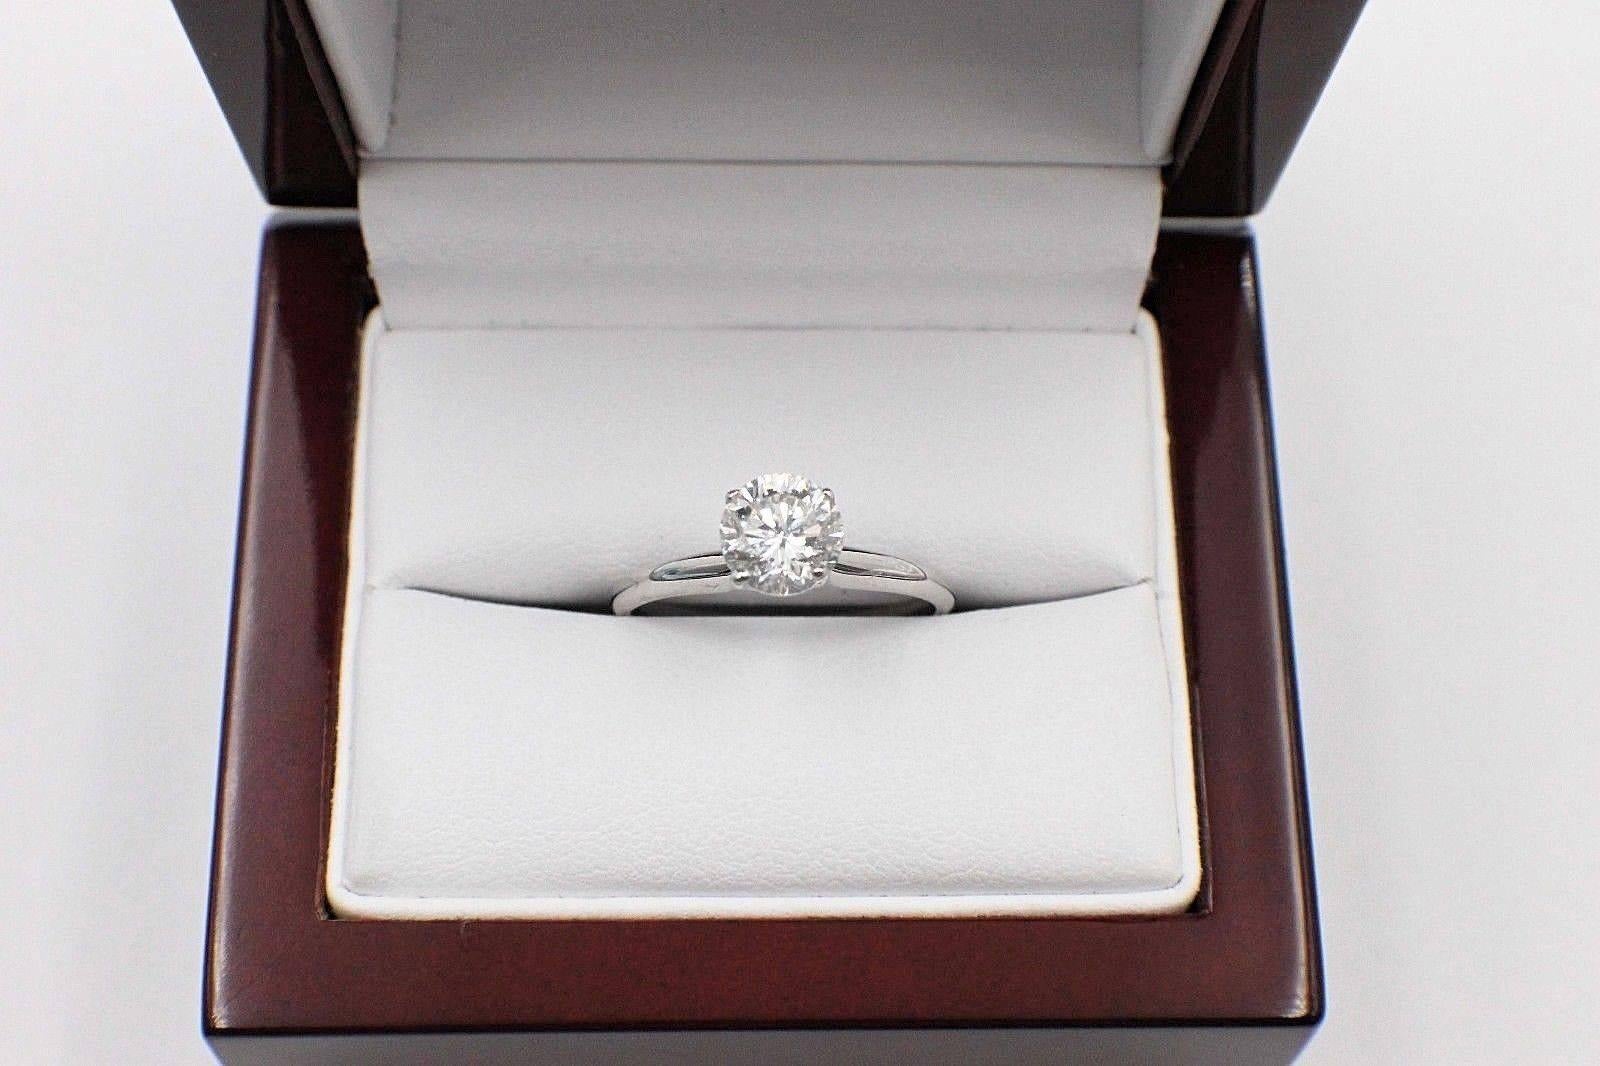 BRILLIANT STAR
Style:  Solitaire 4-Prong Engagement Rings
Serial Number:  EGL USA # US35516701D
Metal:  White Gold 14KT
Size:  6 - sizable  
Total Carat Weight:  1.05 CTS
Diamond Shape:  Round Modified Brilliant
Diamond Color & Clarity:  H /